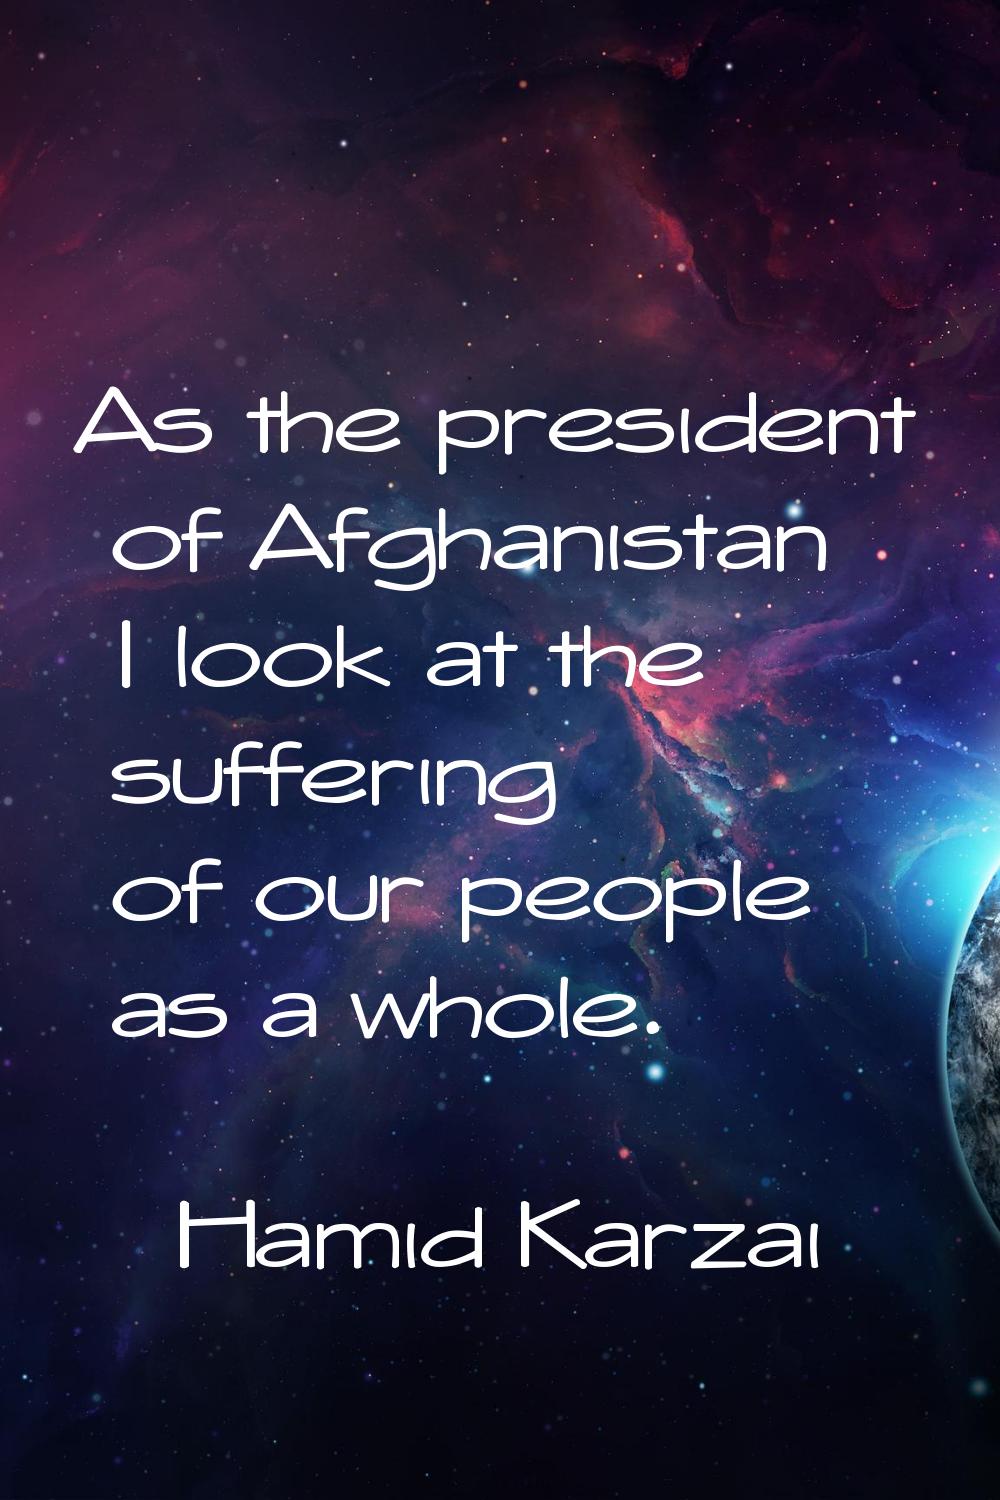 As the president of Afghanistan I look at the suffering of our people as a whole.